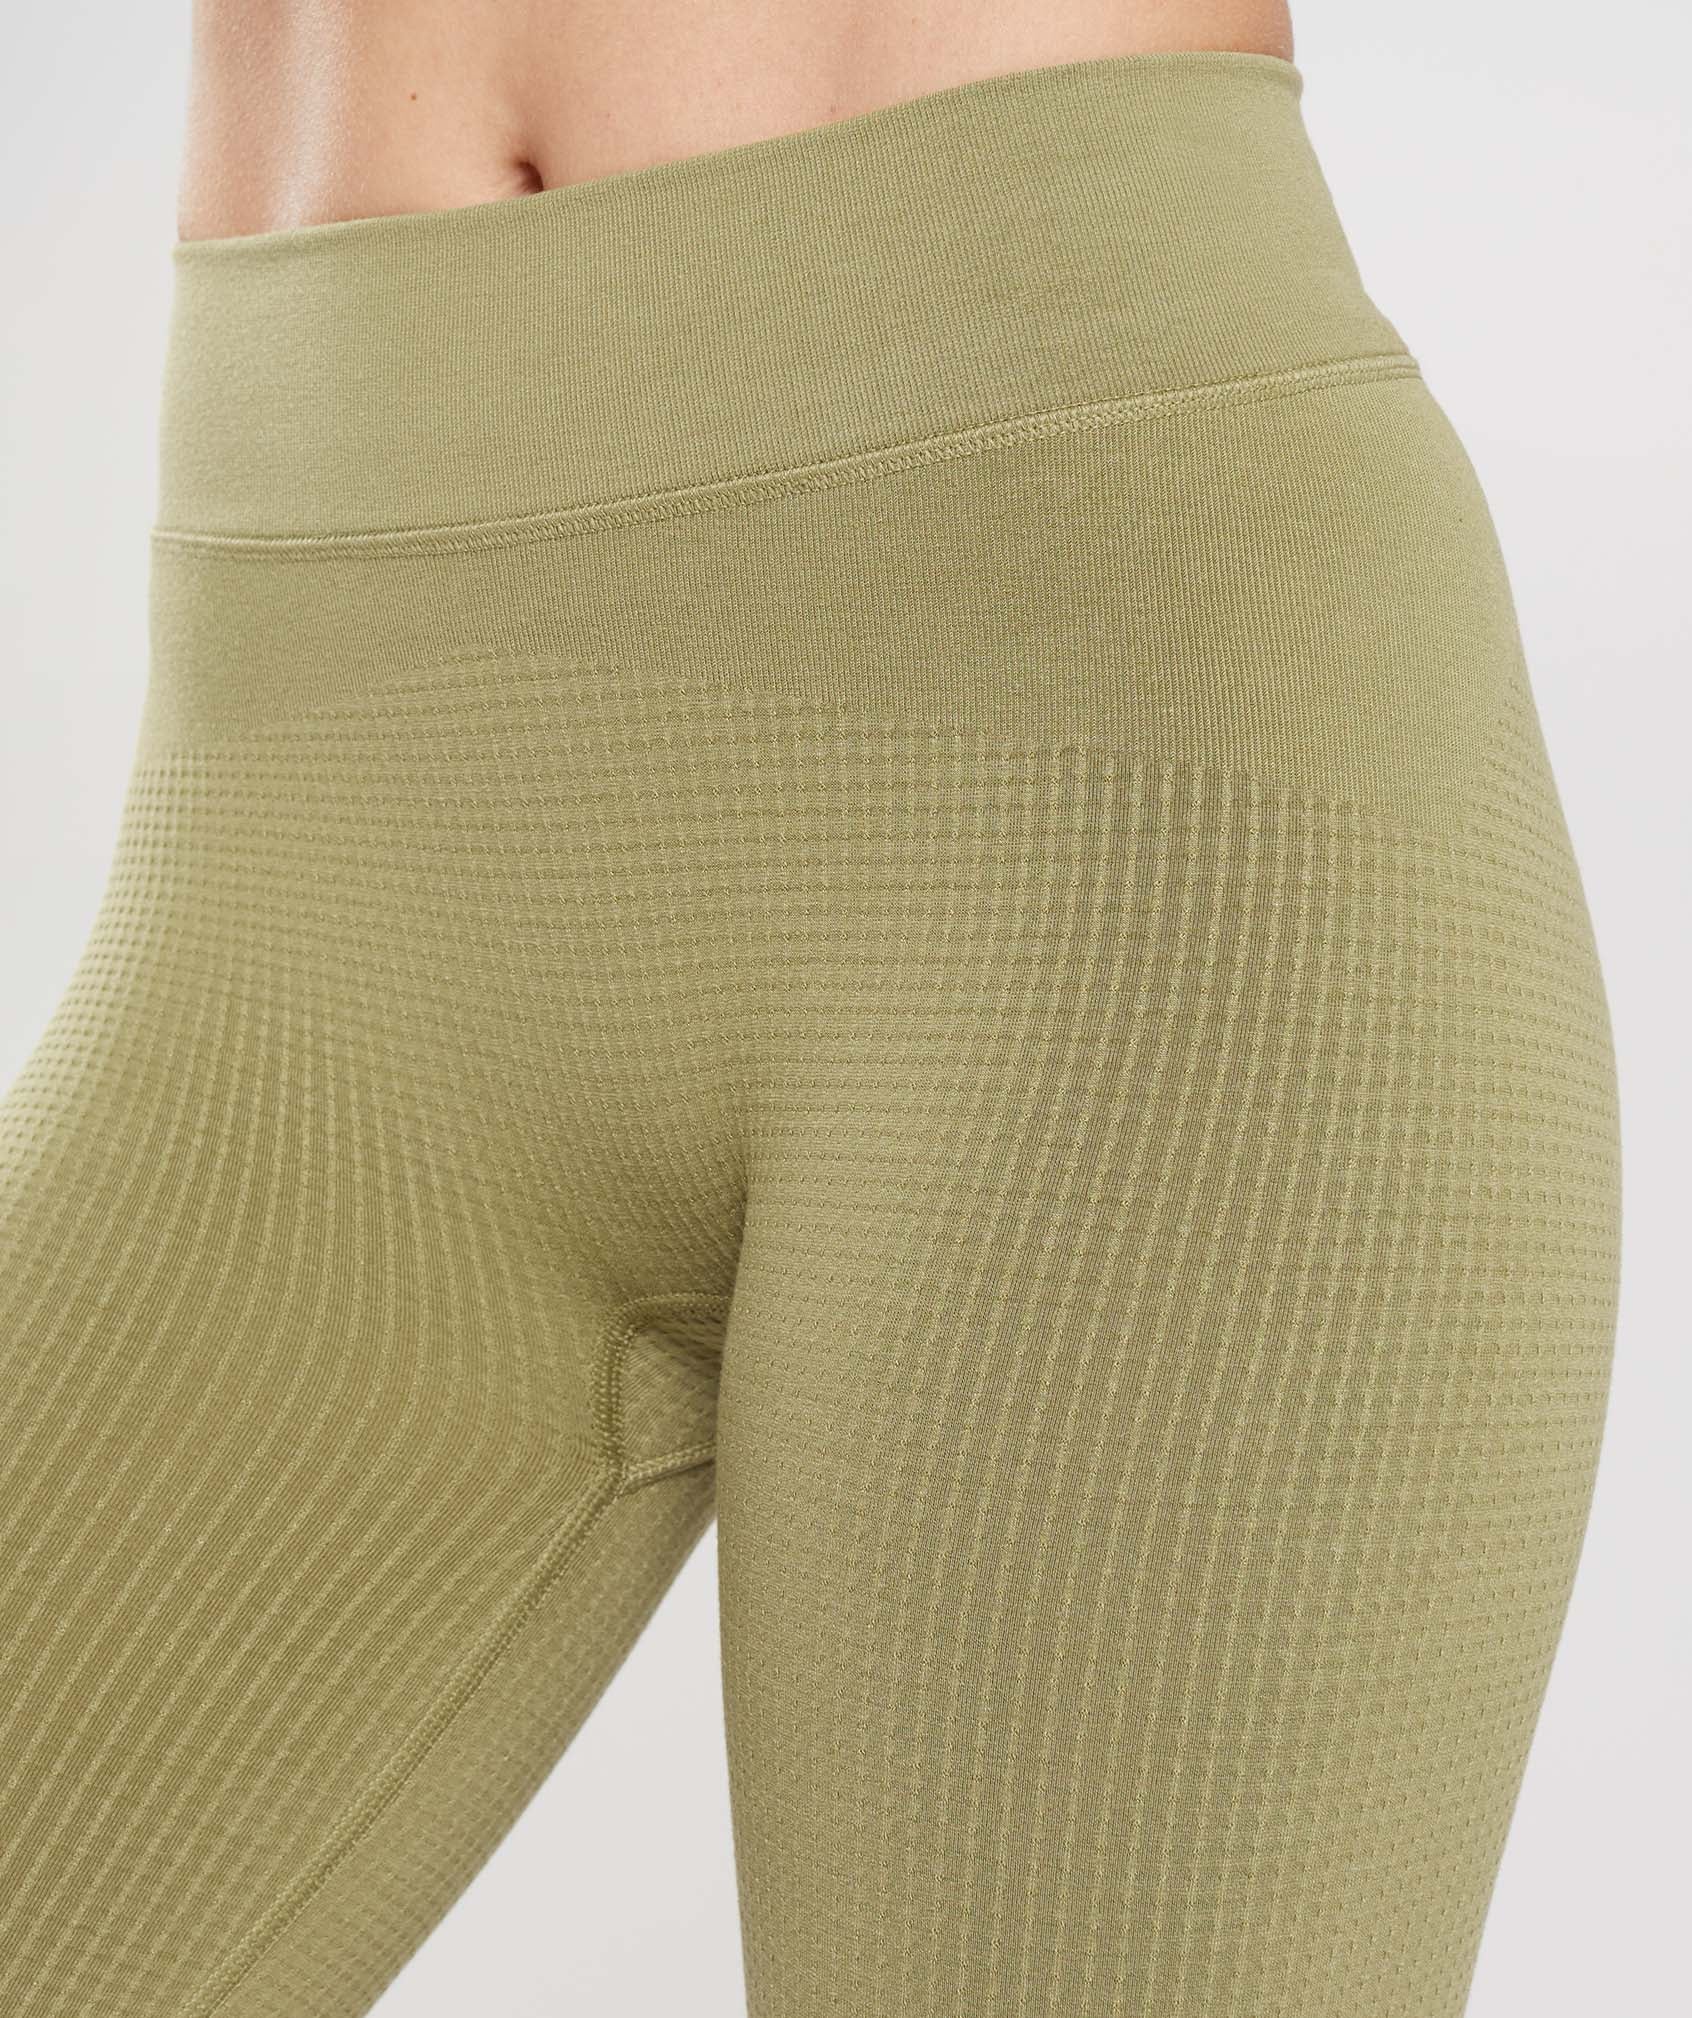 Pause Seamless Leggings in Griffin Green - view 5